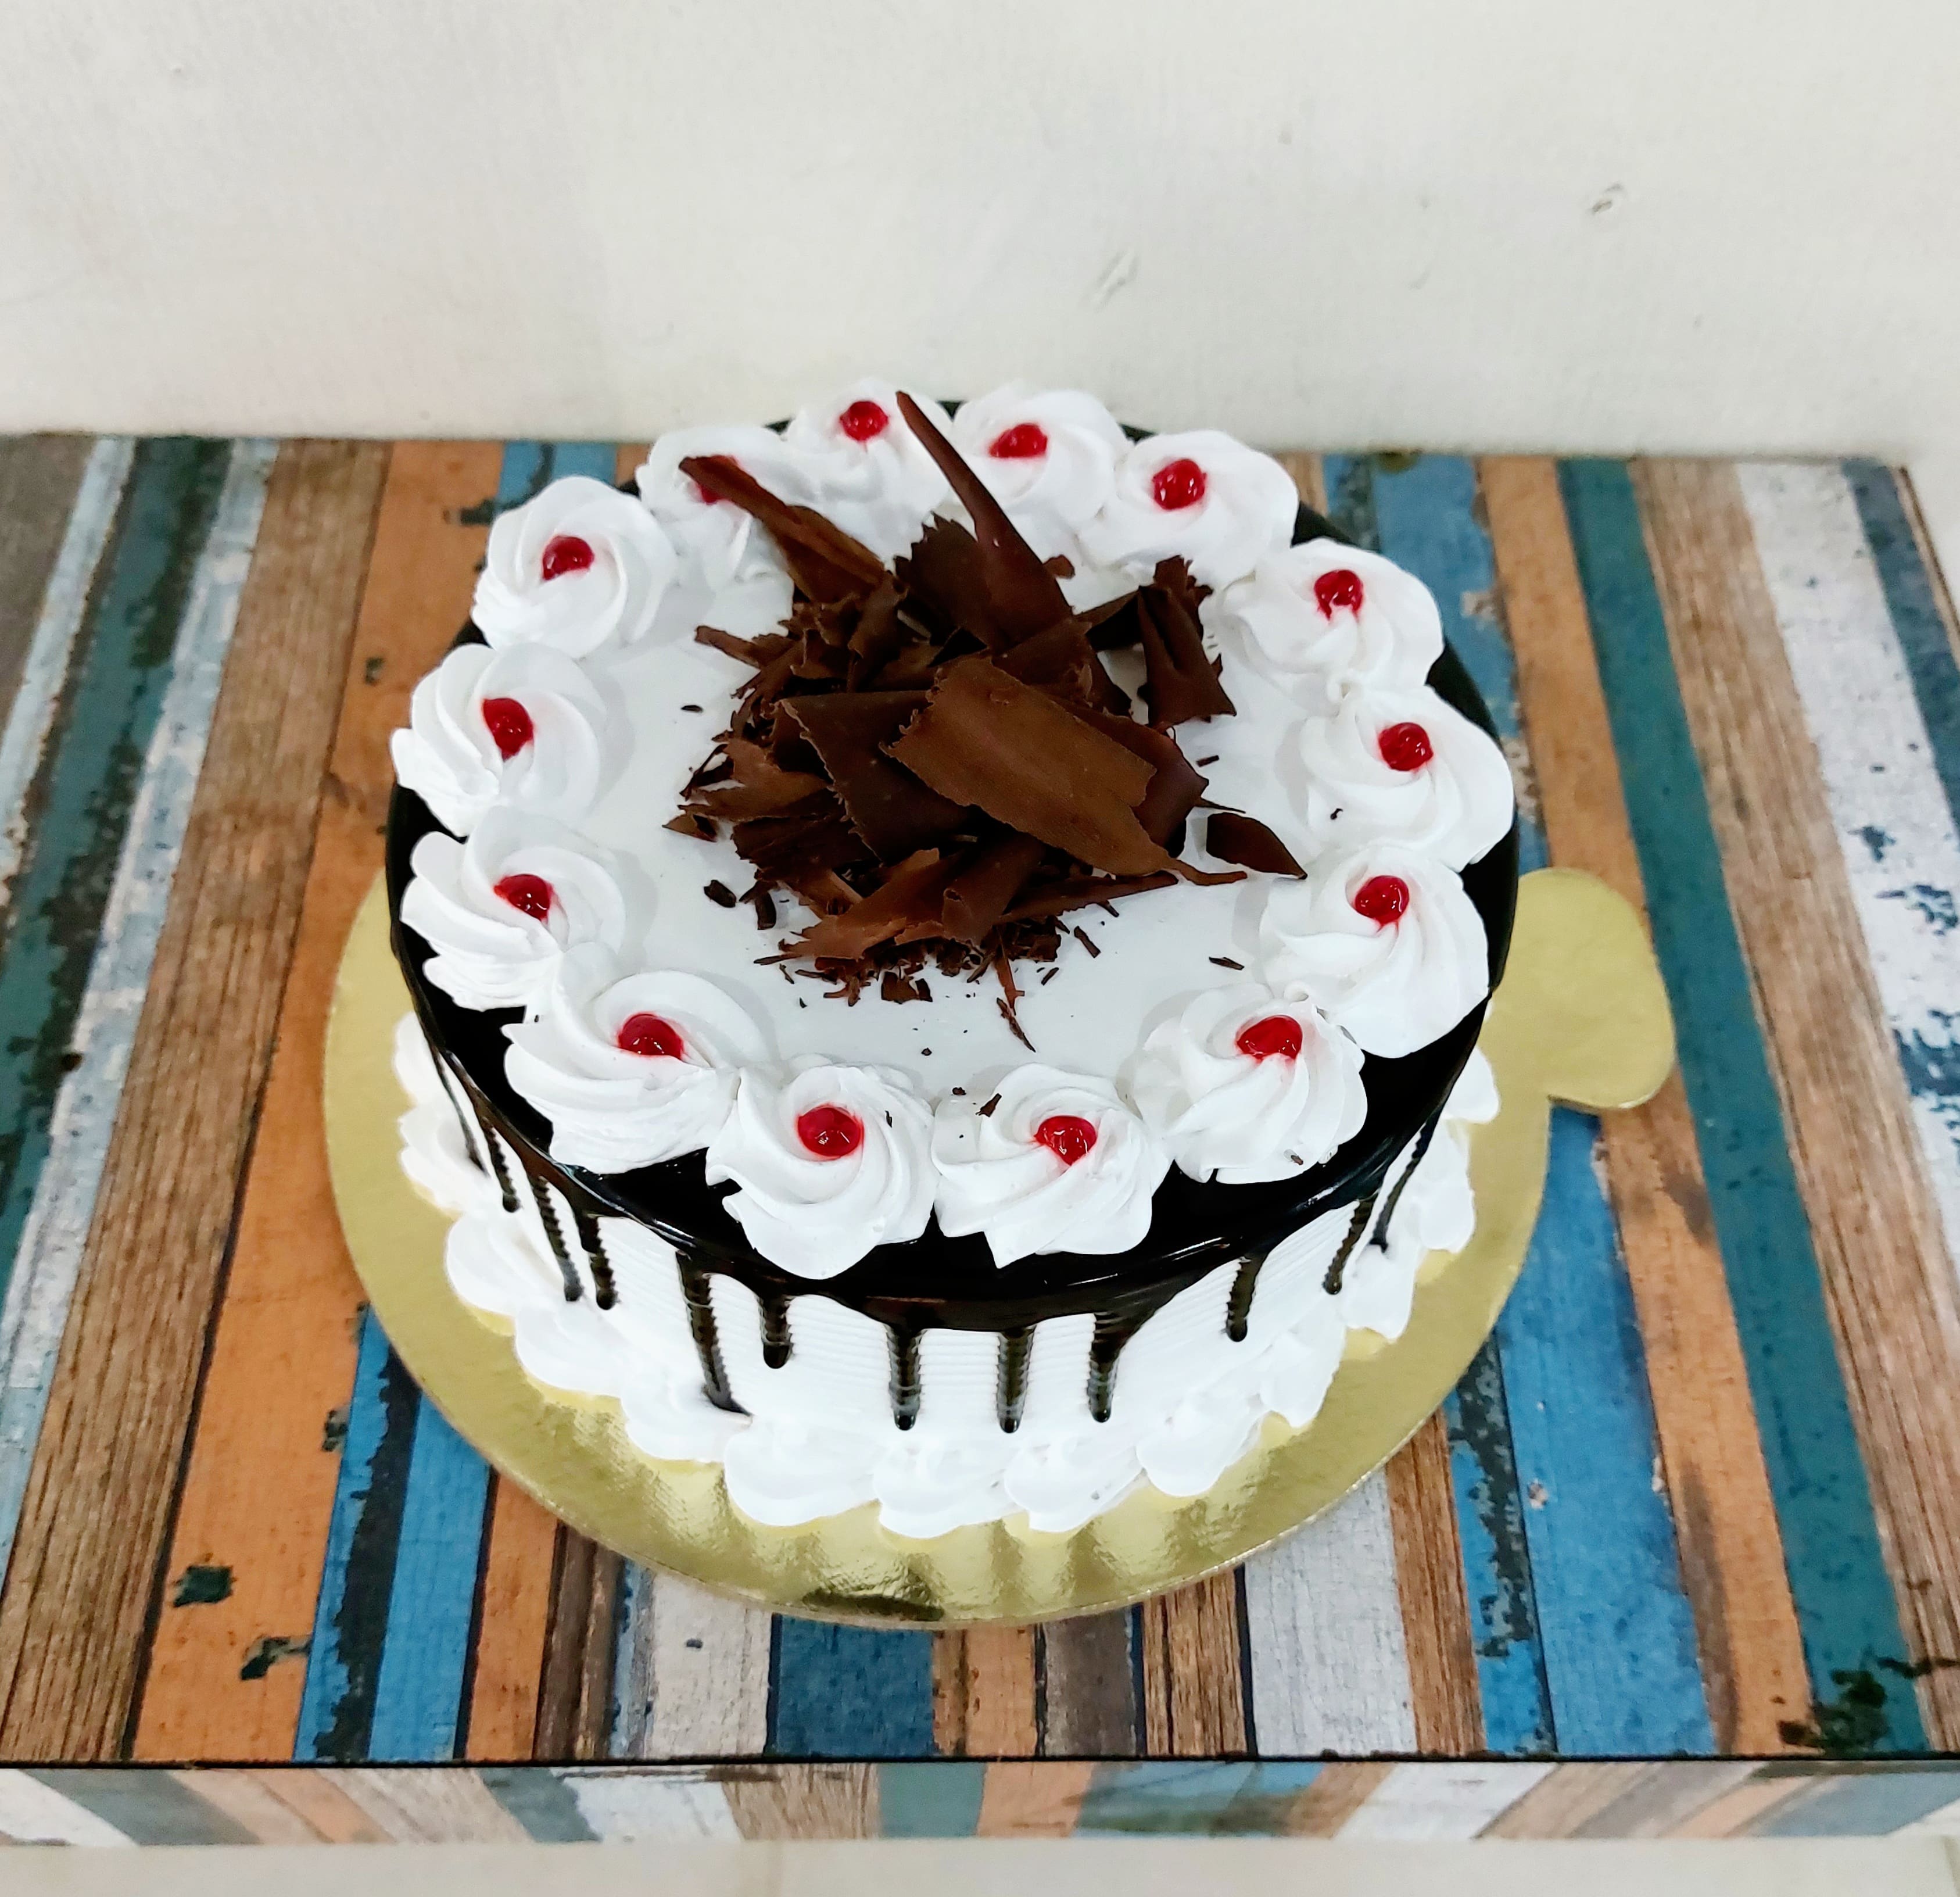 Top more than 77 ccd black forest cake best - in.daotaonec